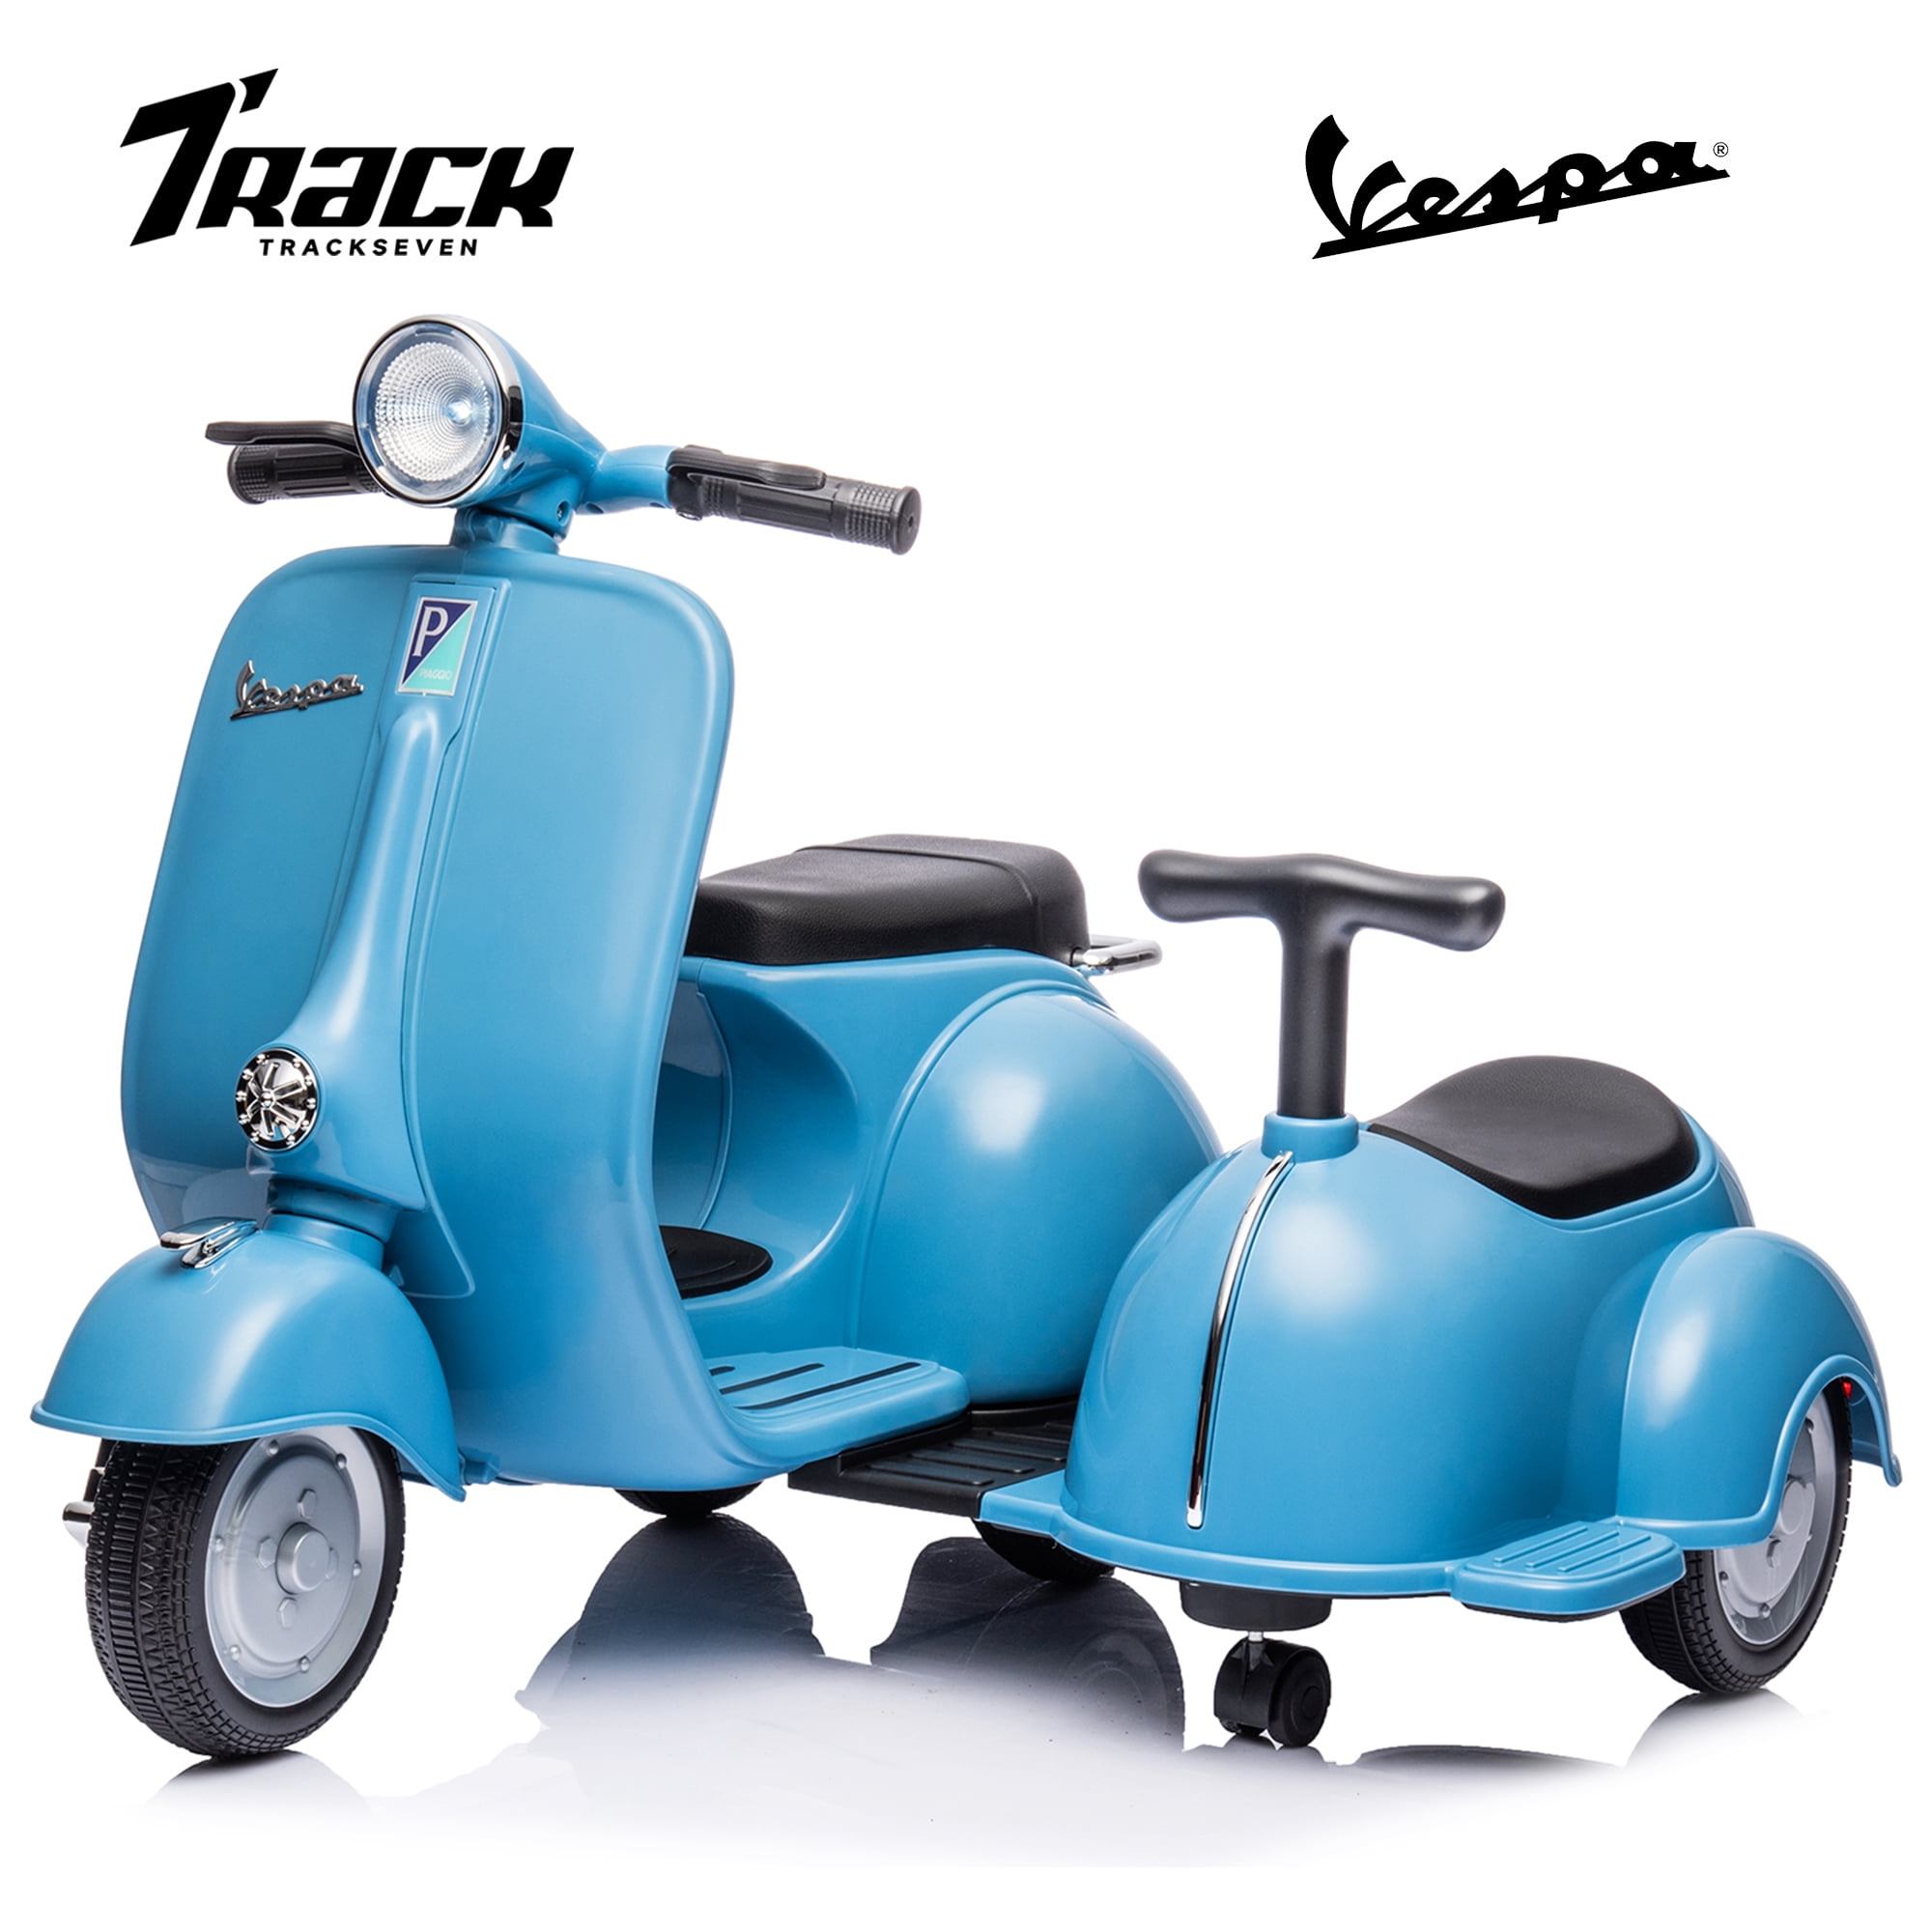  Kid Trax Toddler Vespa Scooter Electric Ride On Toy, 3-5 Years  Old, 6 Volt, Max Weight 60 lbs, Red : Toys & Games